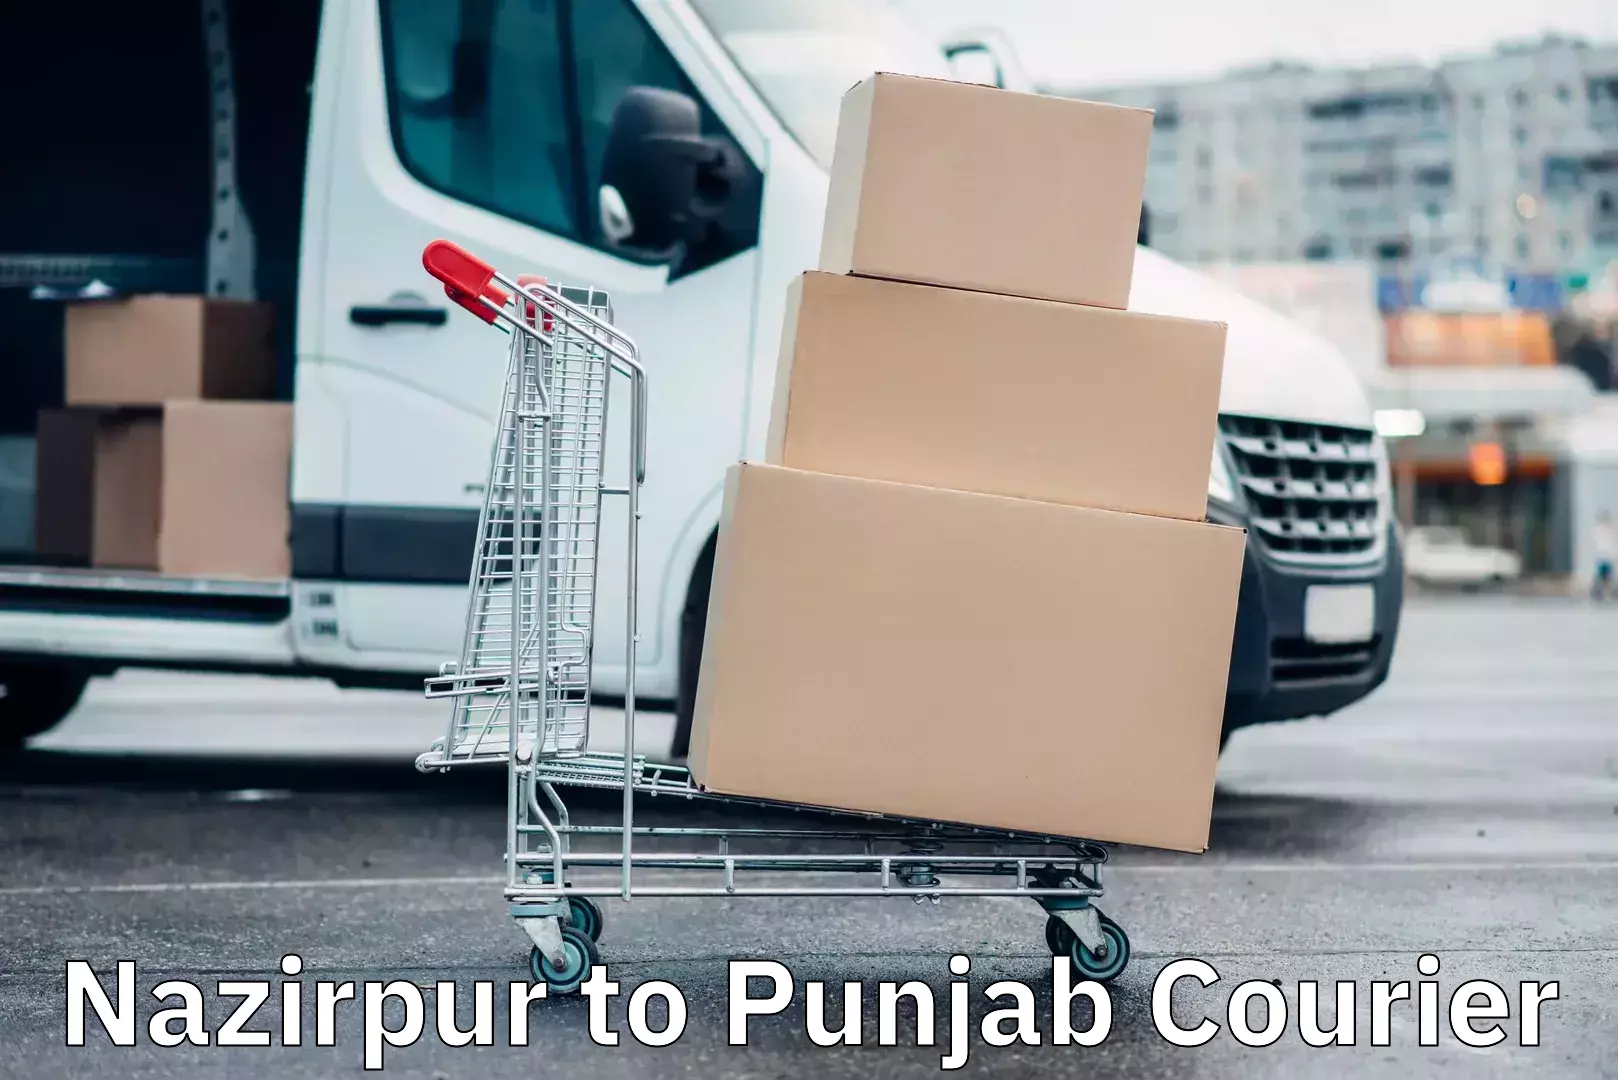 Quality courier partnerships Nazirpur to Ludhiana